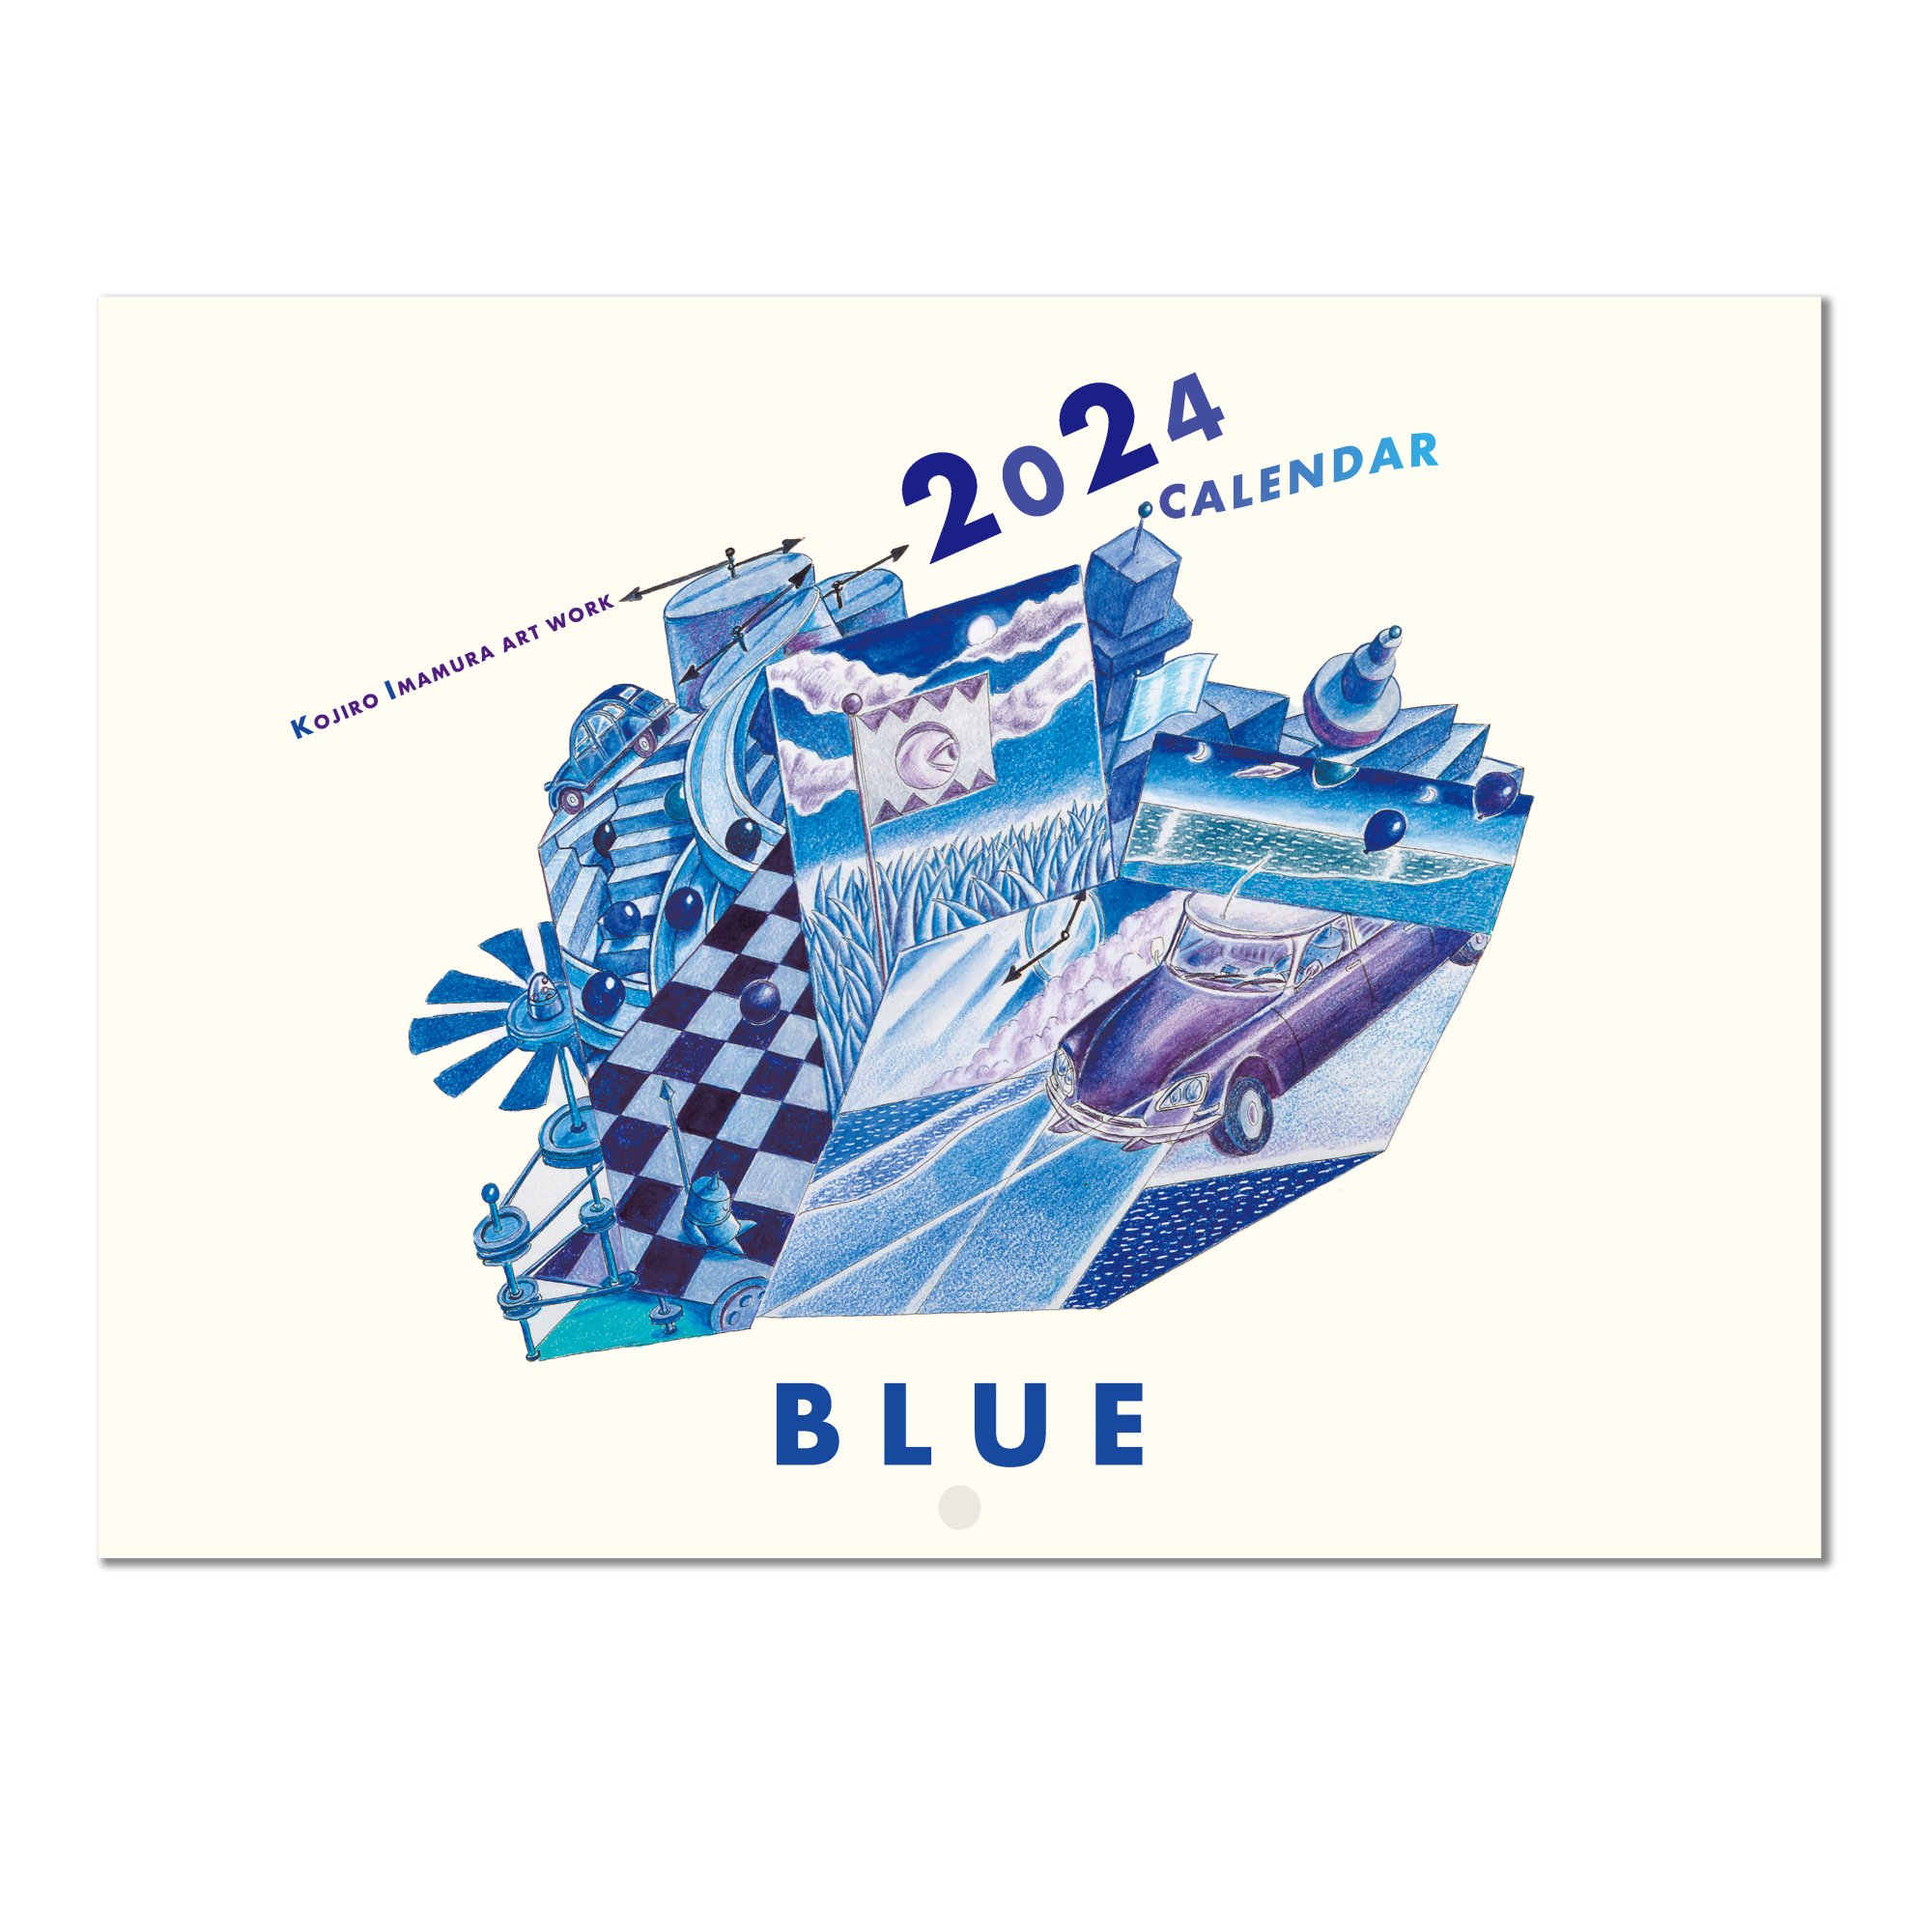 <img class='new_mark_img1' src='https://img.shop-pro.jp/img/new/icons15.gif' style='border:none;display:inline;margin:0px;padding:0px;width:auto;' />2024 CALENDAR 『BLUE』